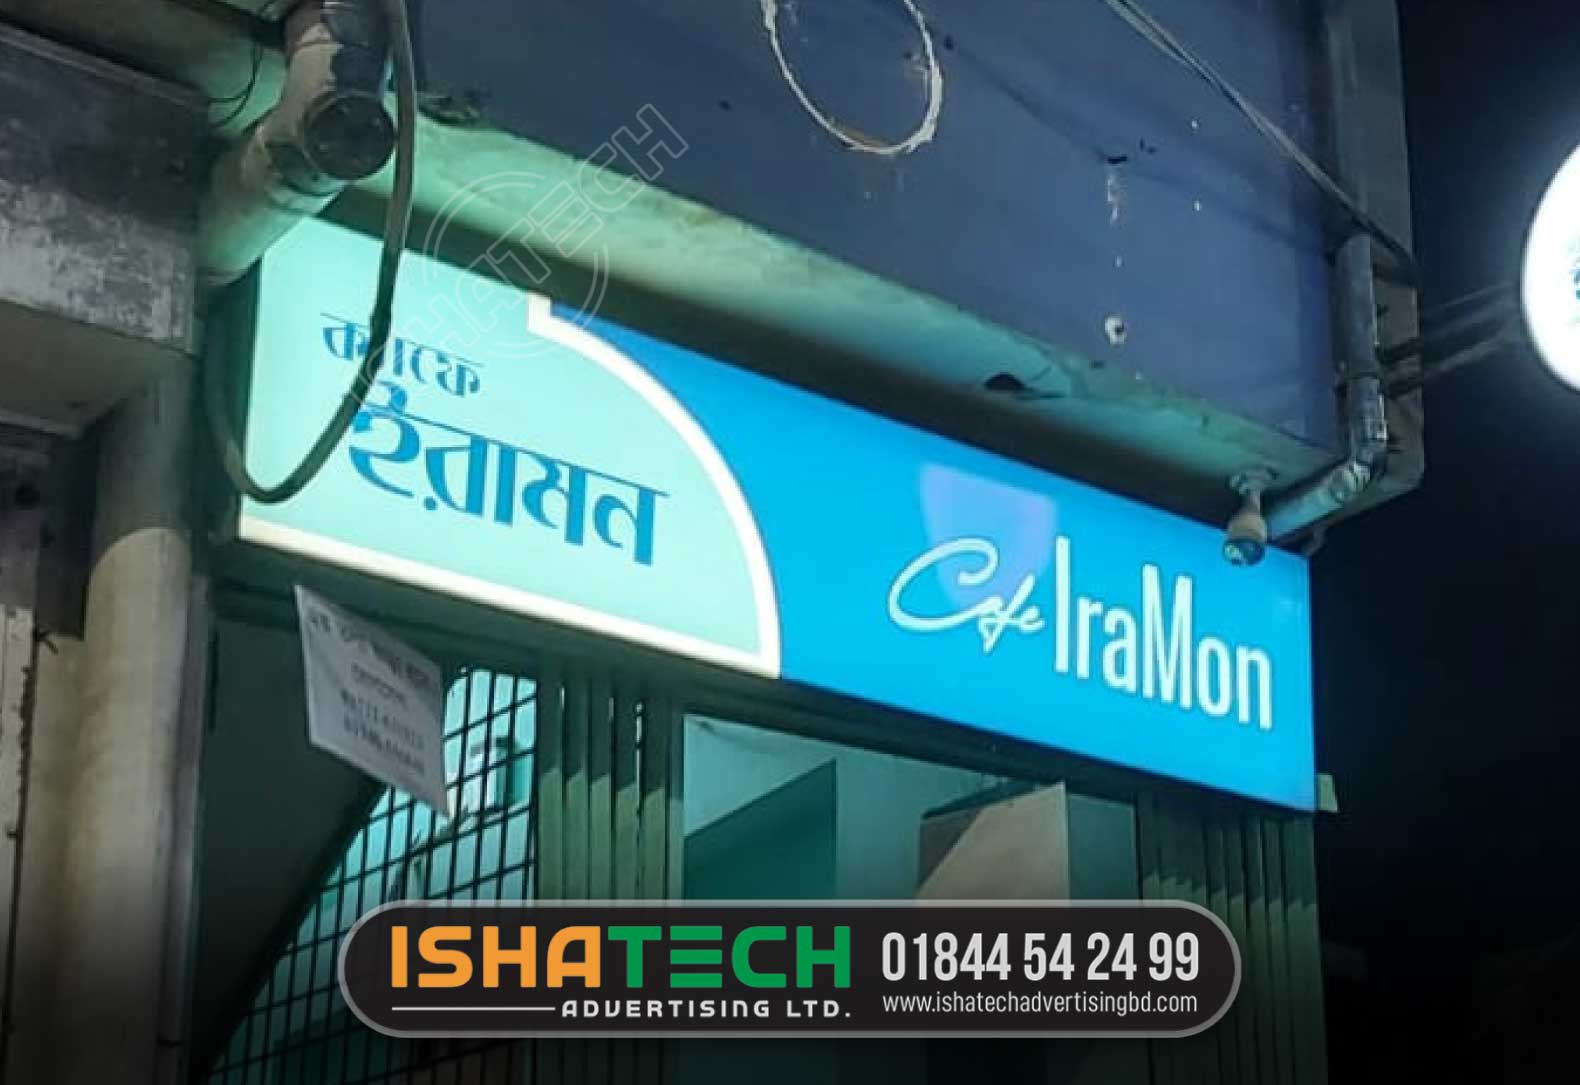 IRAMON STORE PROFILE SIGNBOARD MAKER BD, Store profile signboard maker bd. Online store profile signboard maker bd. Best store profile signboard maker bd. led sign board price in bangladesh. led sign bd. pvc sign board price in bangladesh. acrylic sign board price in bangladesh.